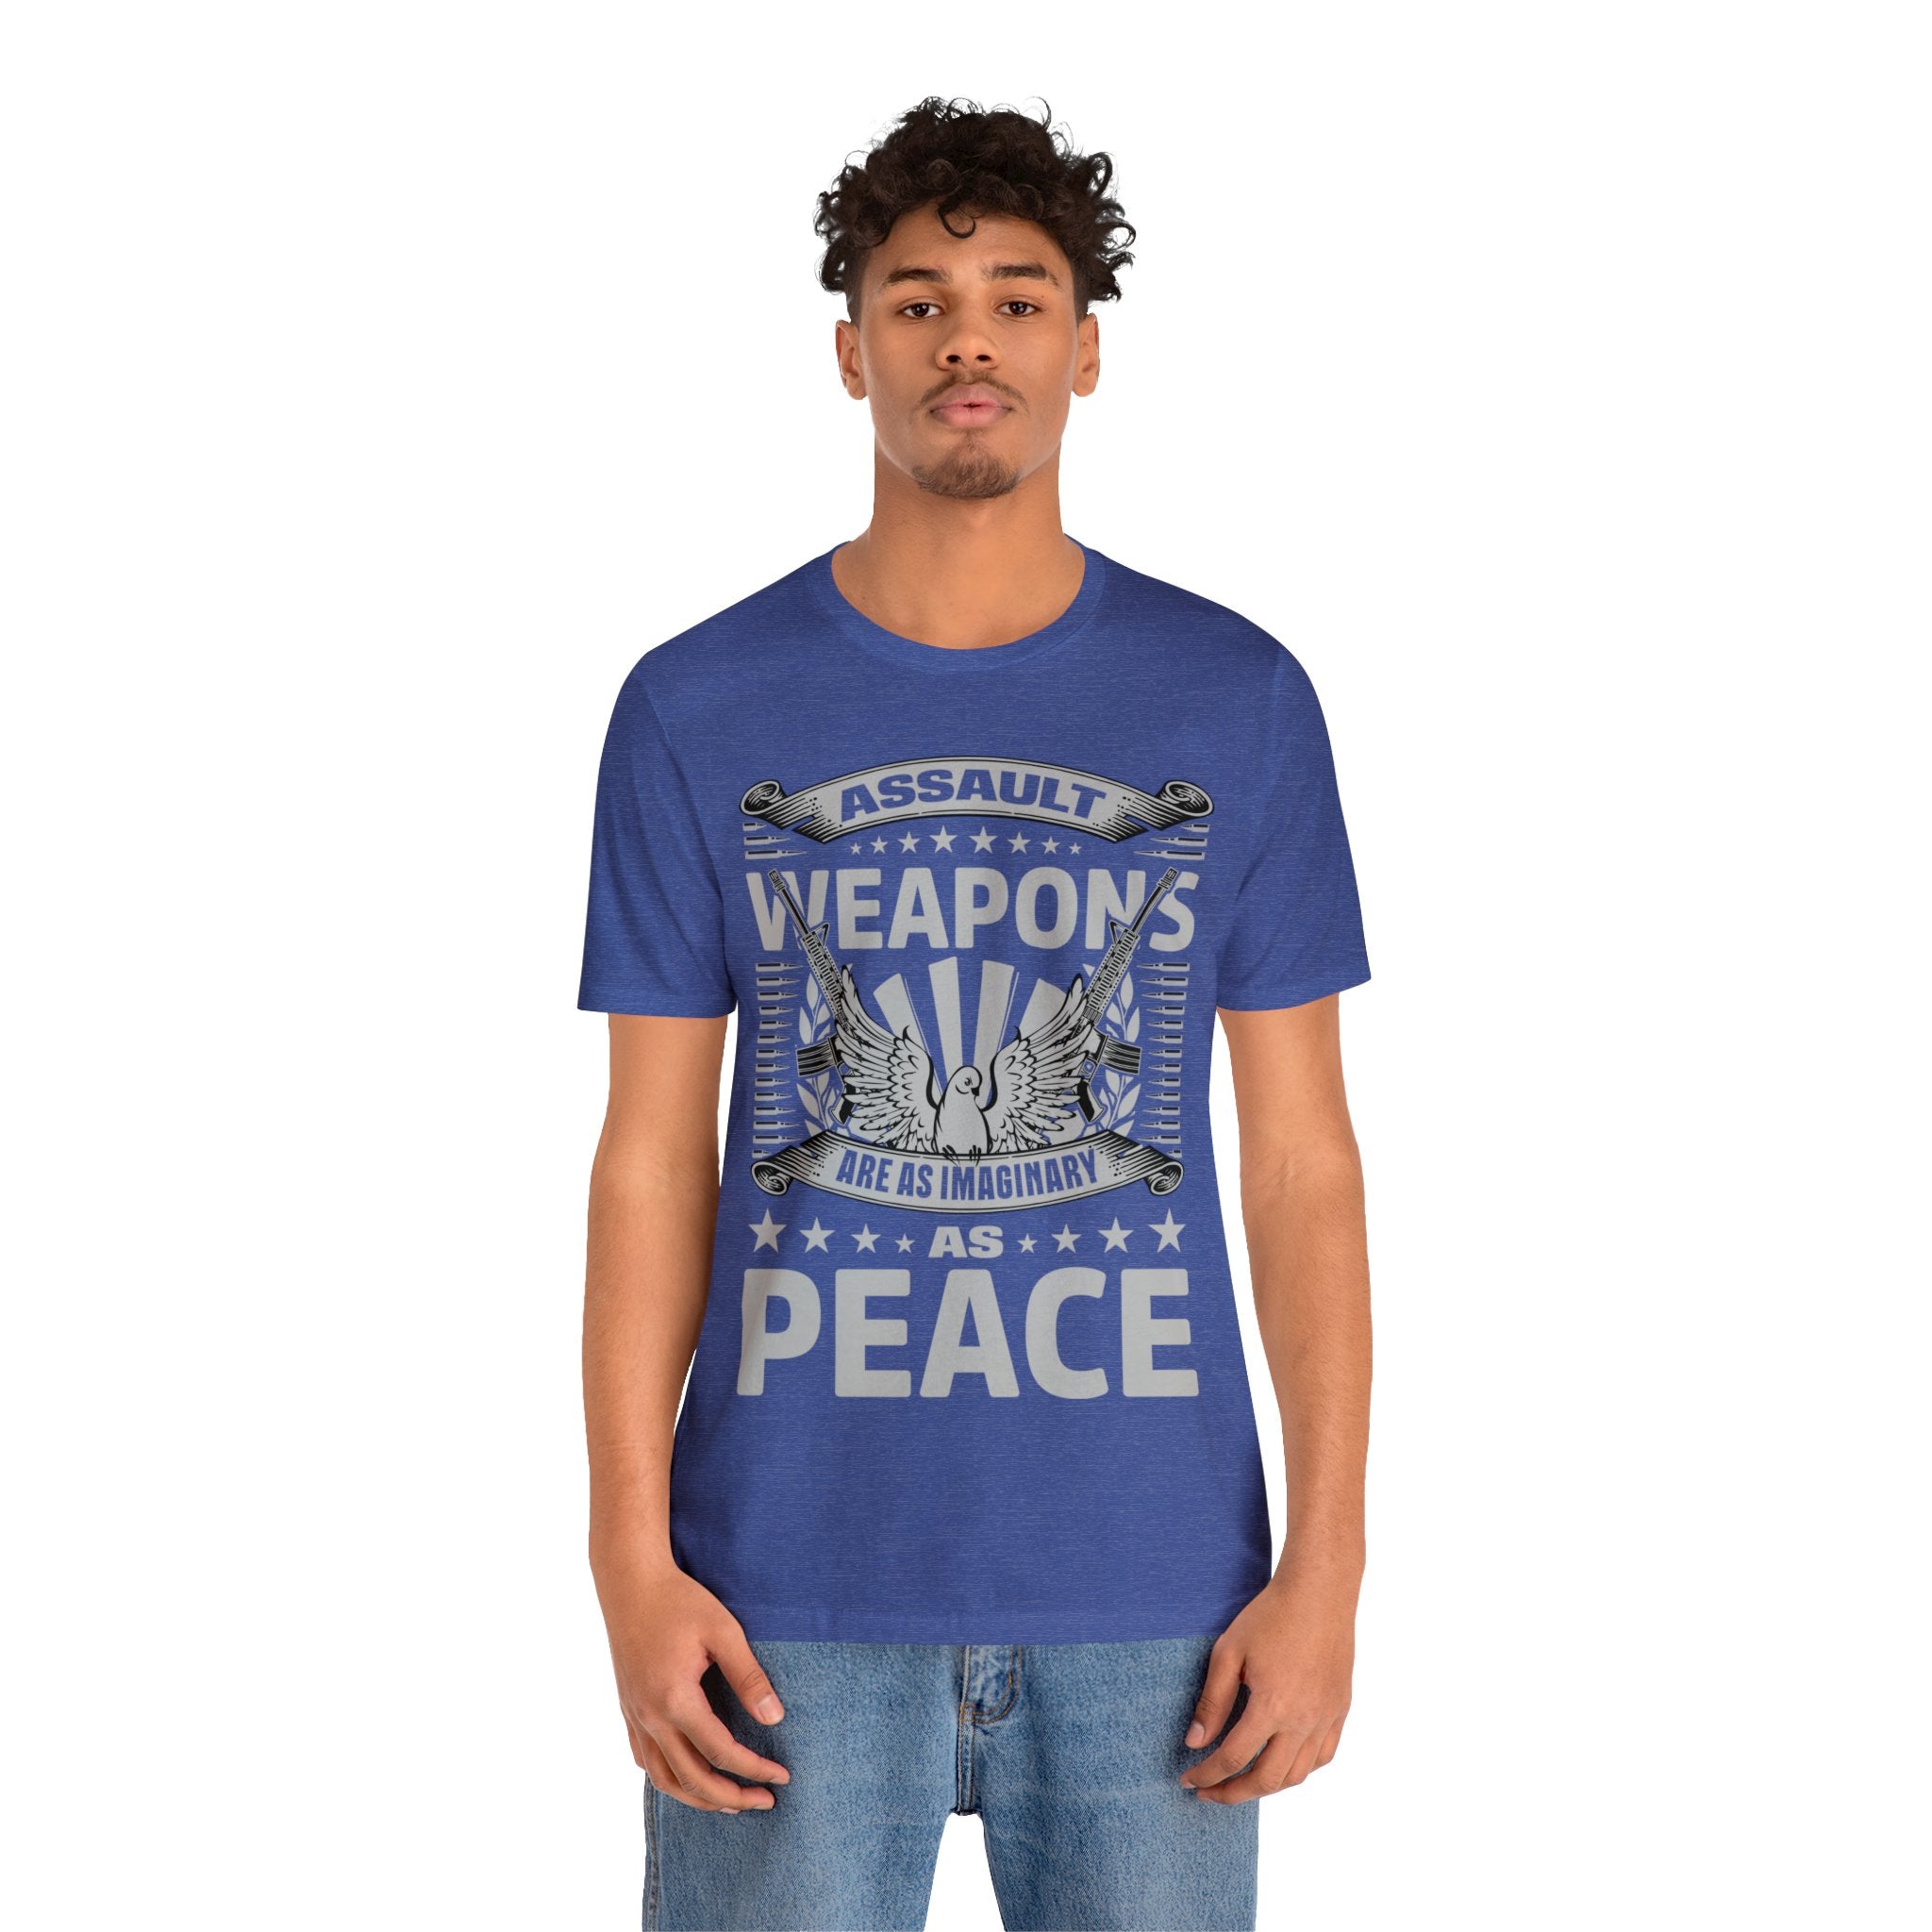 Assault Weapons Imaginary as Peace